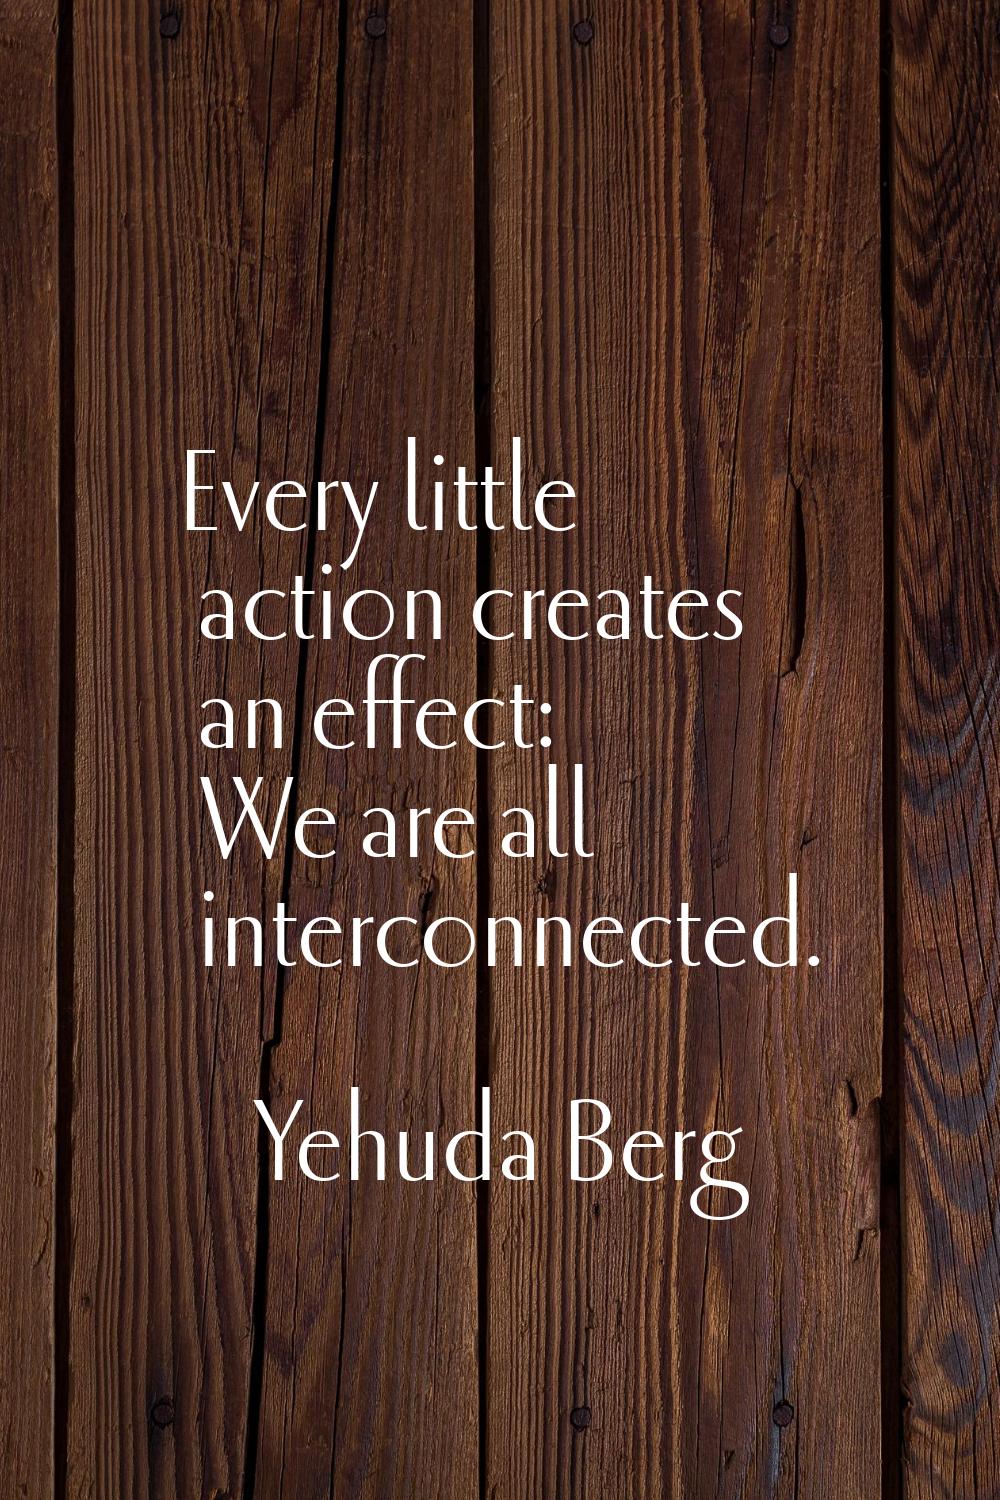 Every little action creates an effect: We are all interconnected.